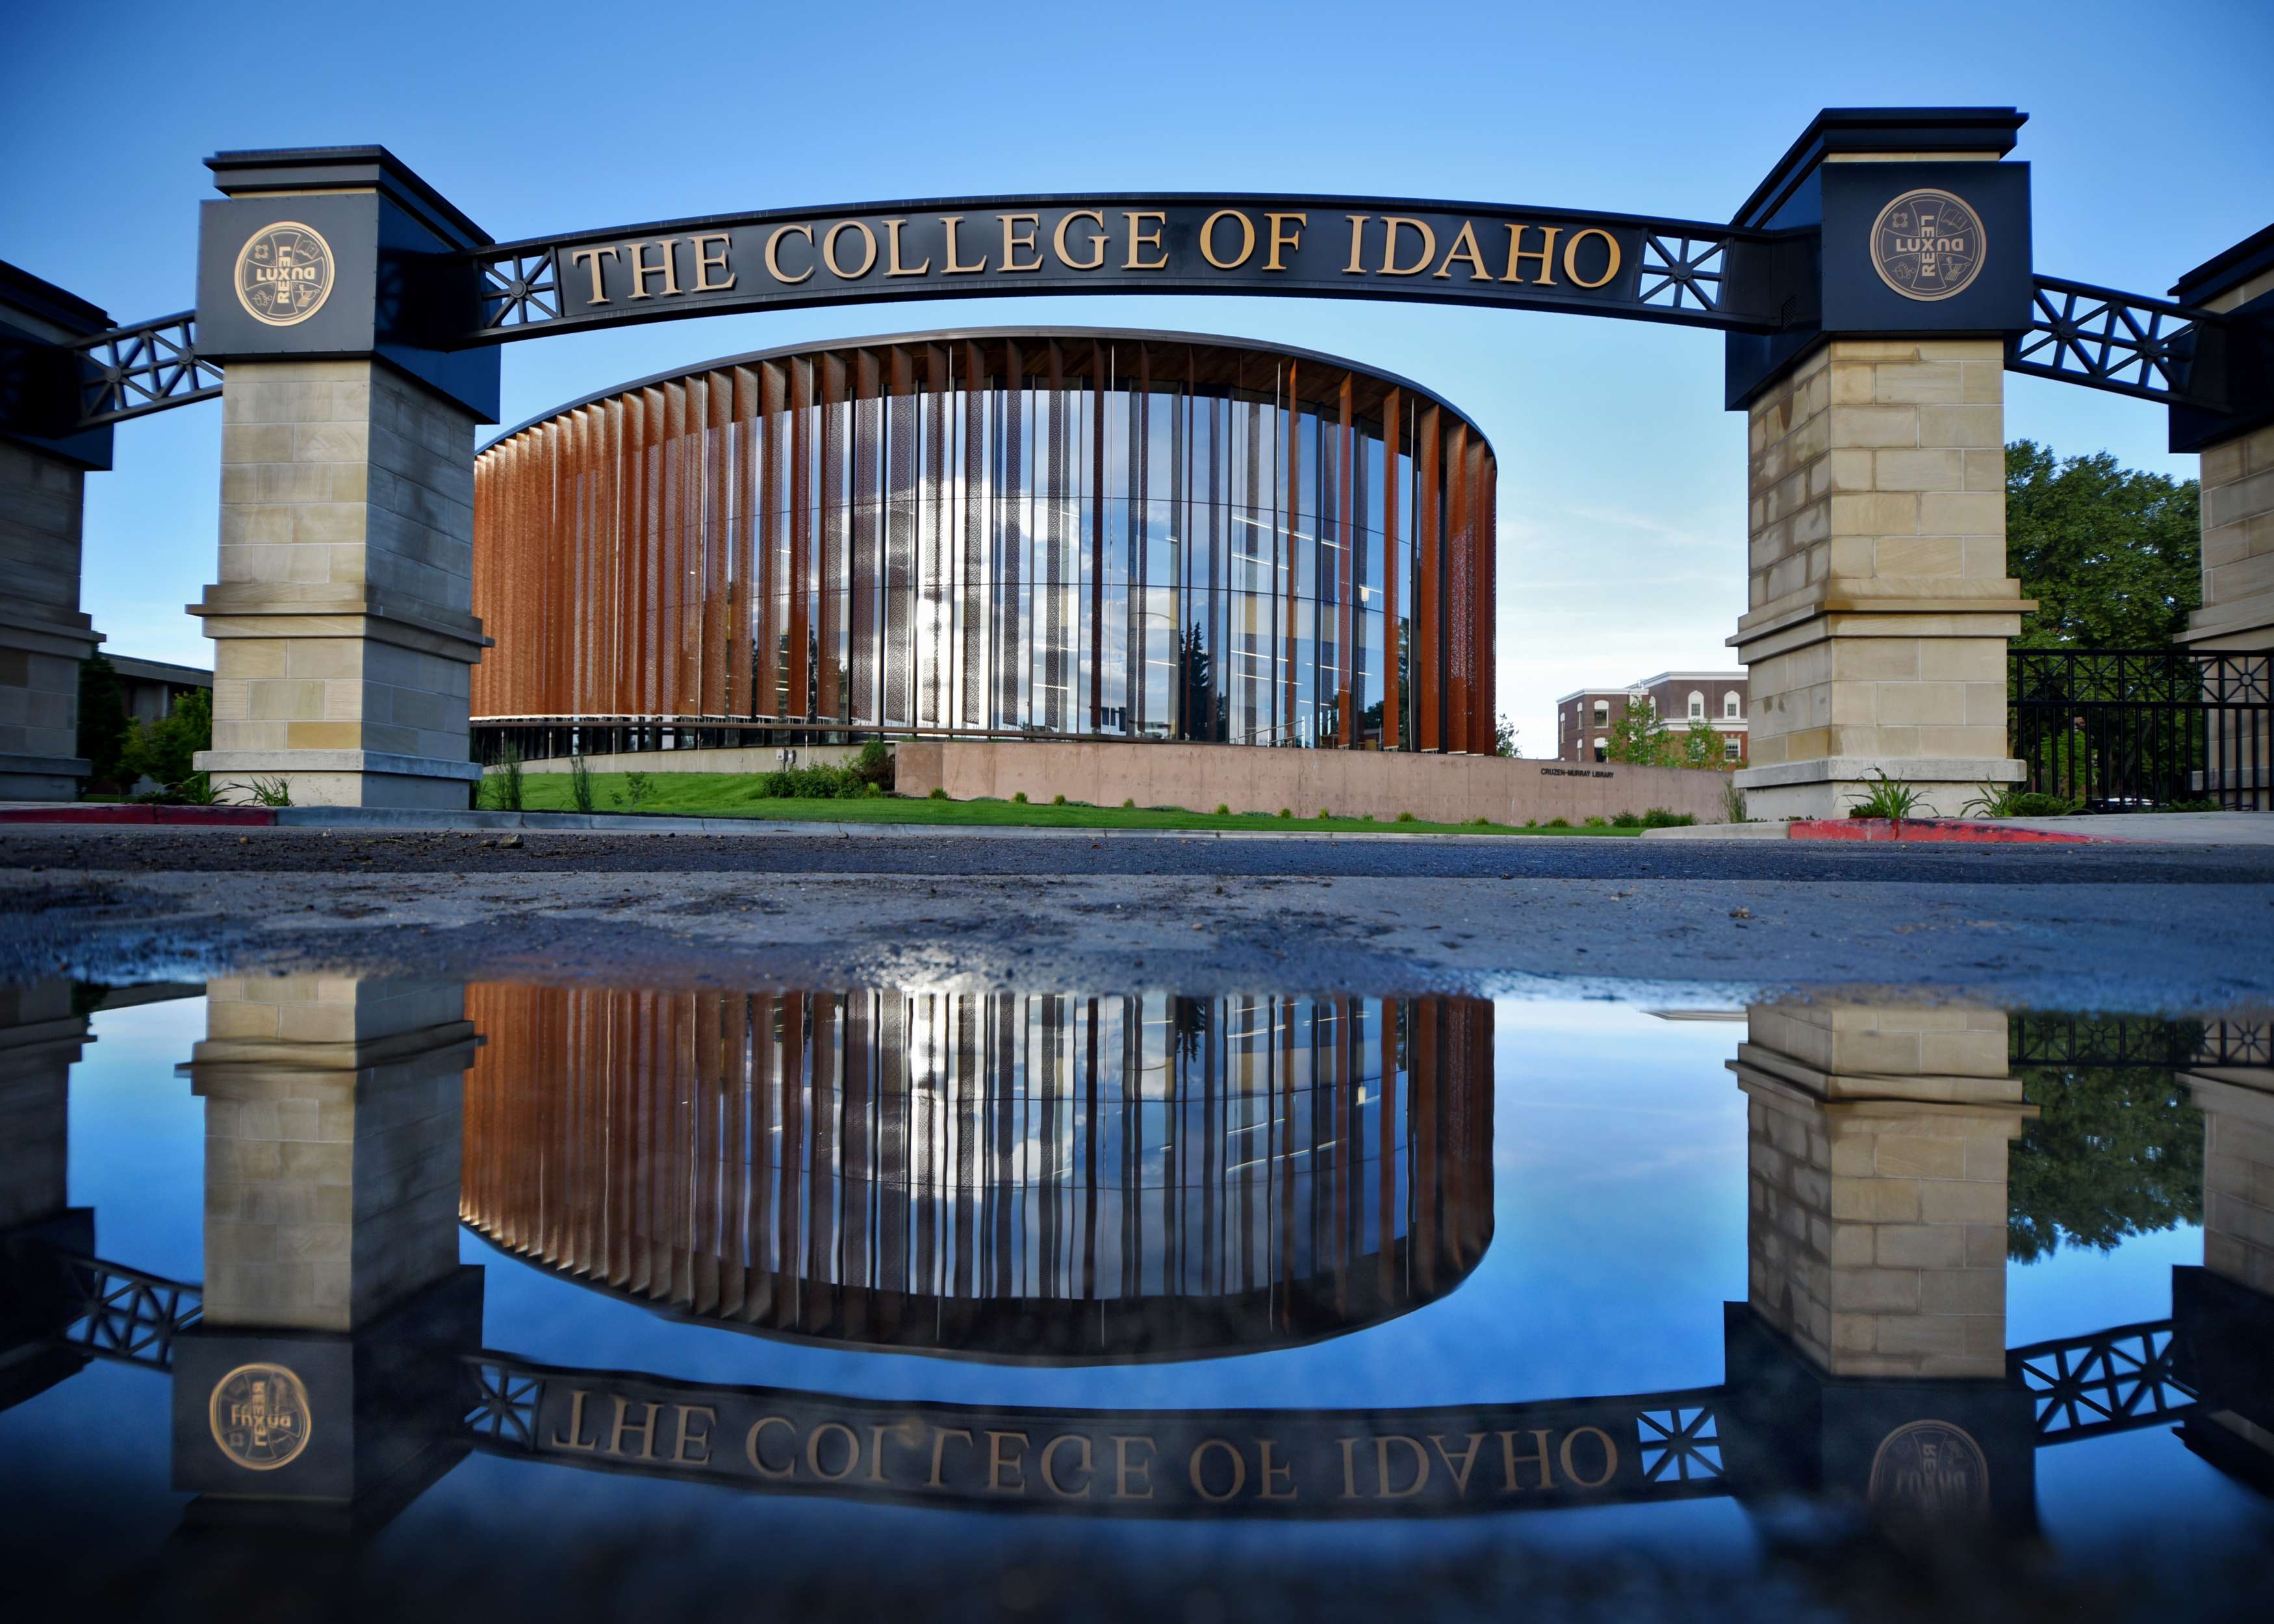 College of Idaho arch and reflection in puddle of water